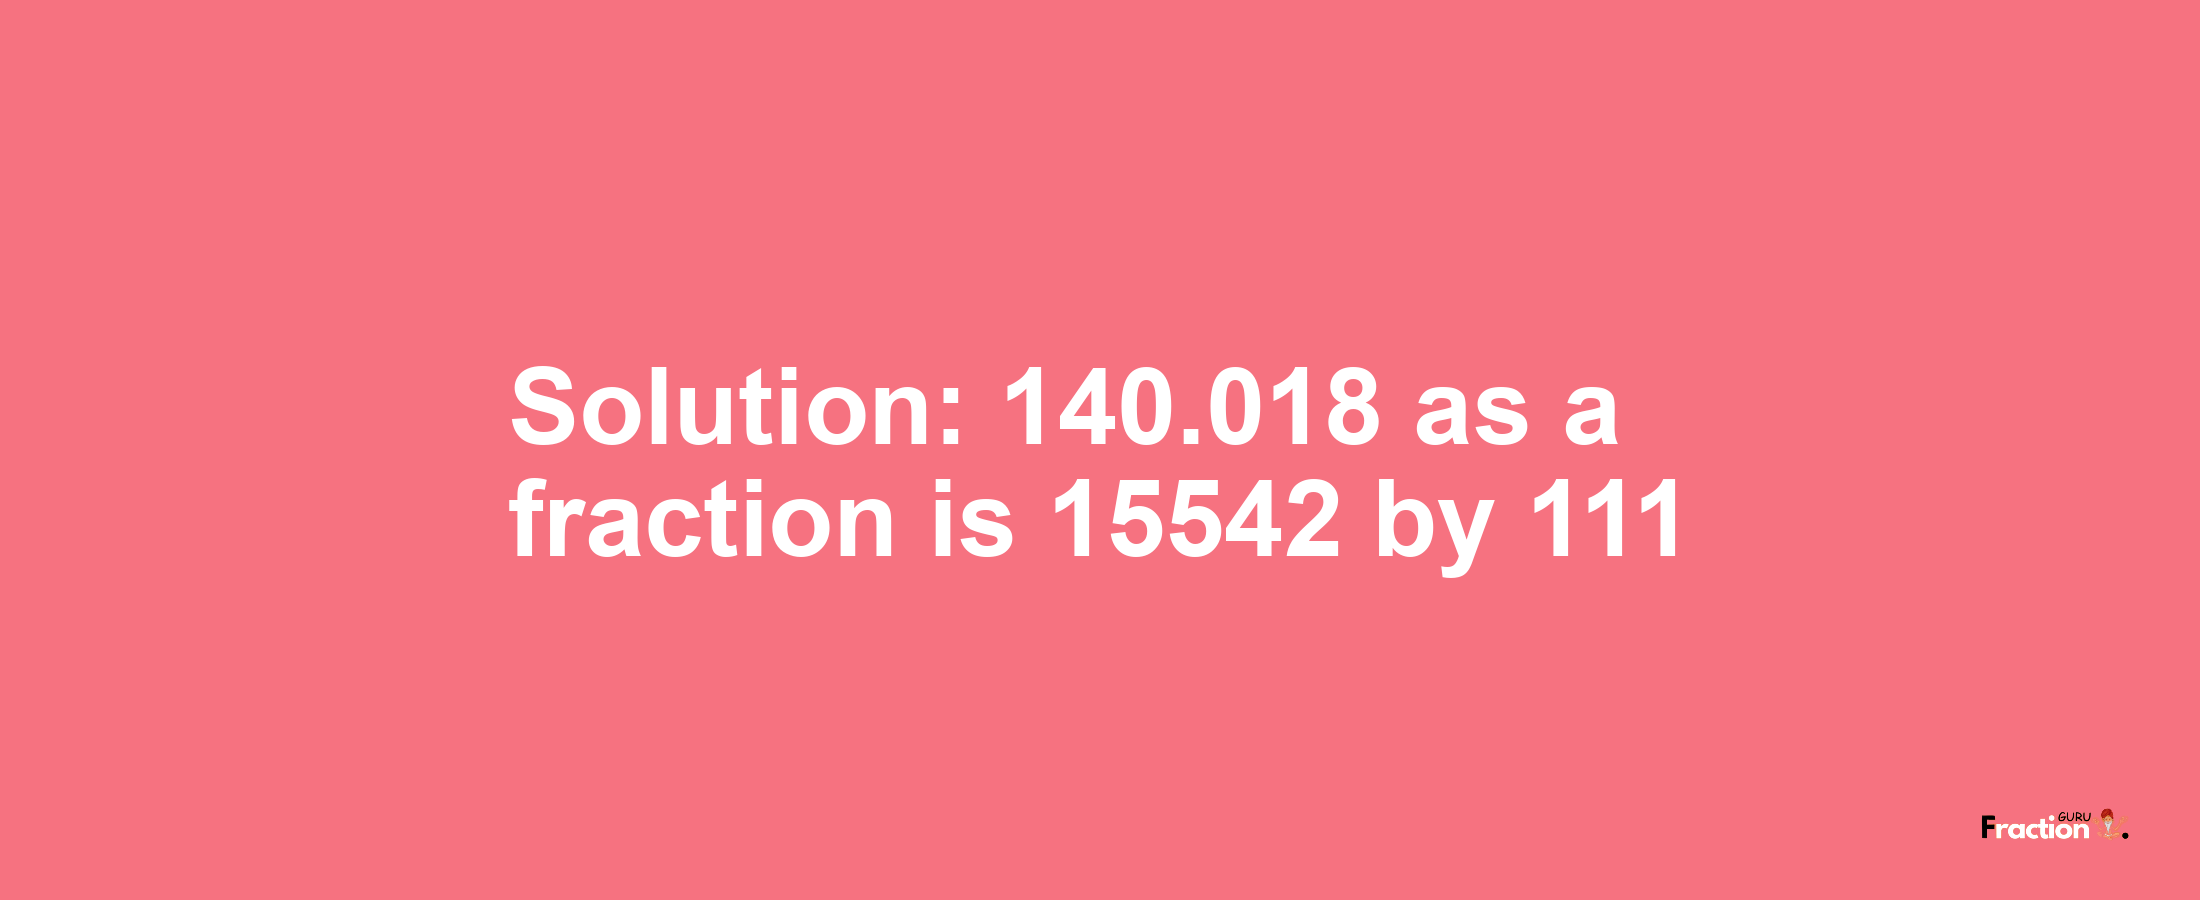 Solution:140.018 as a fraction is 15542/111